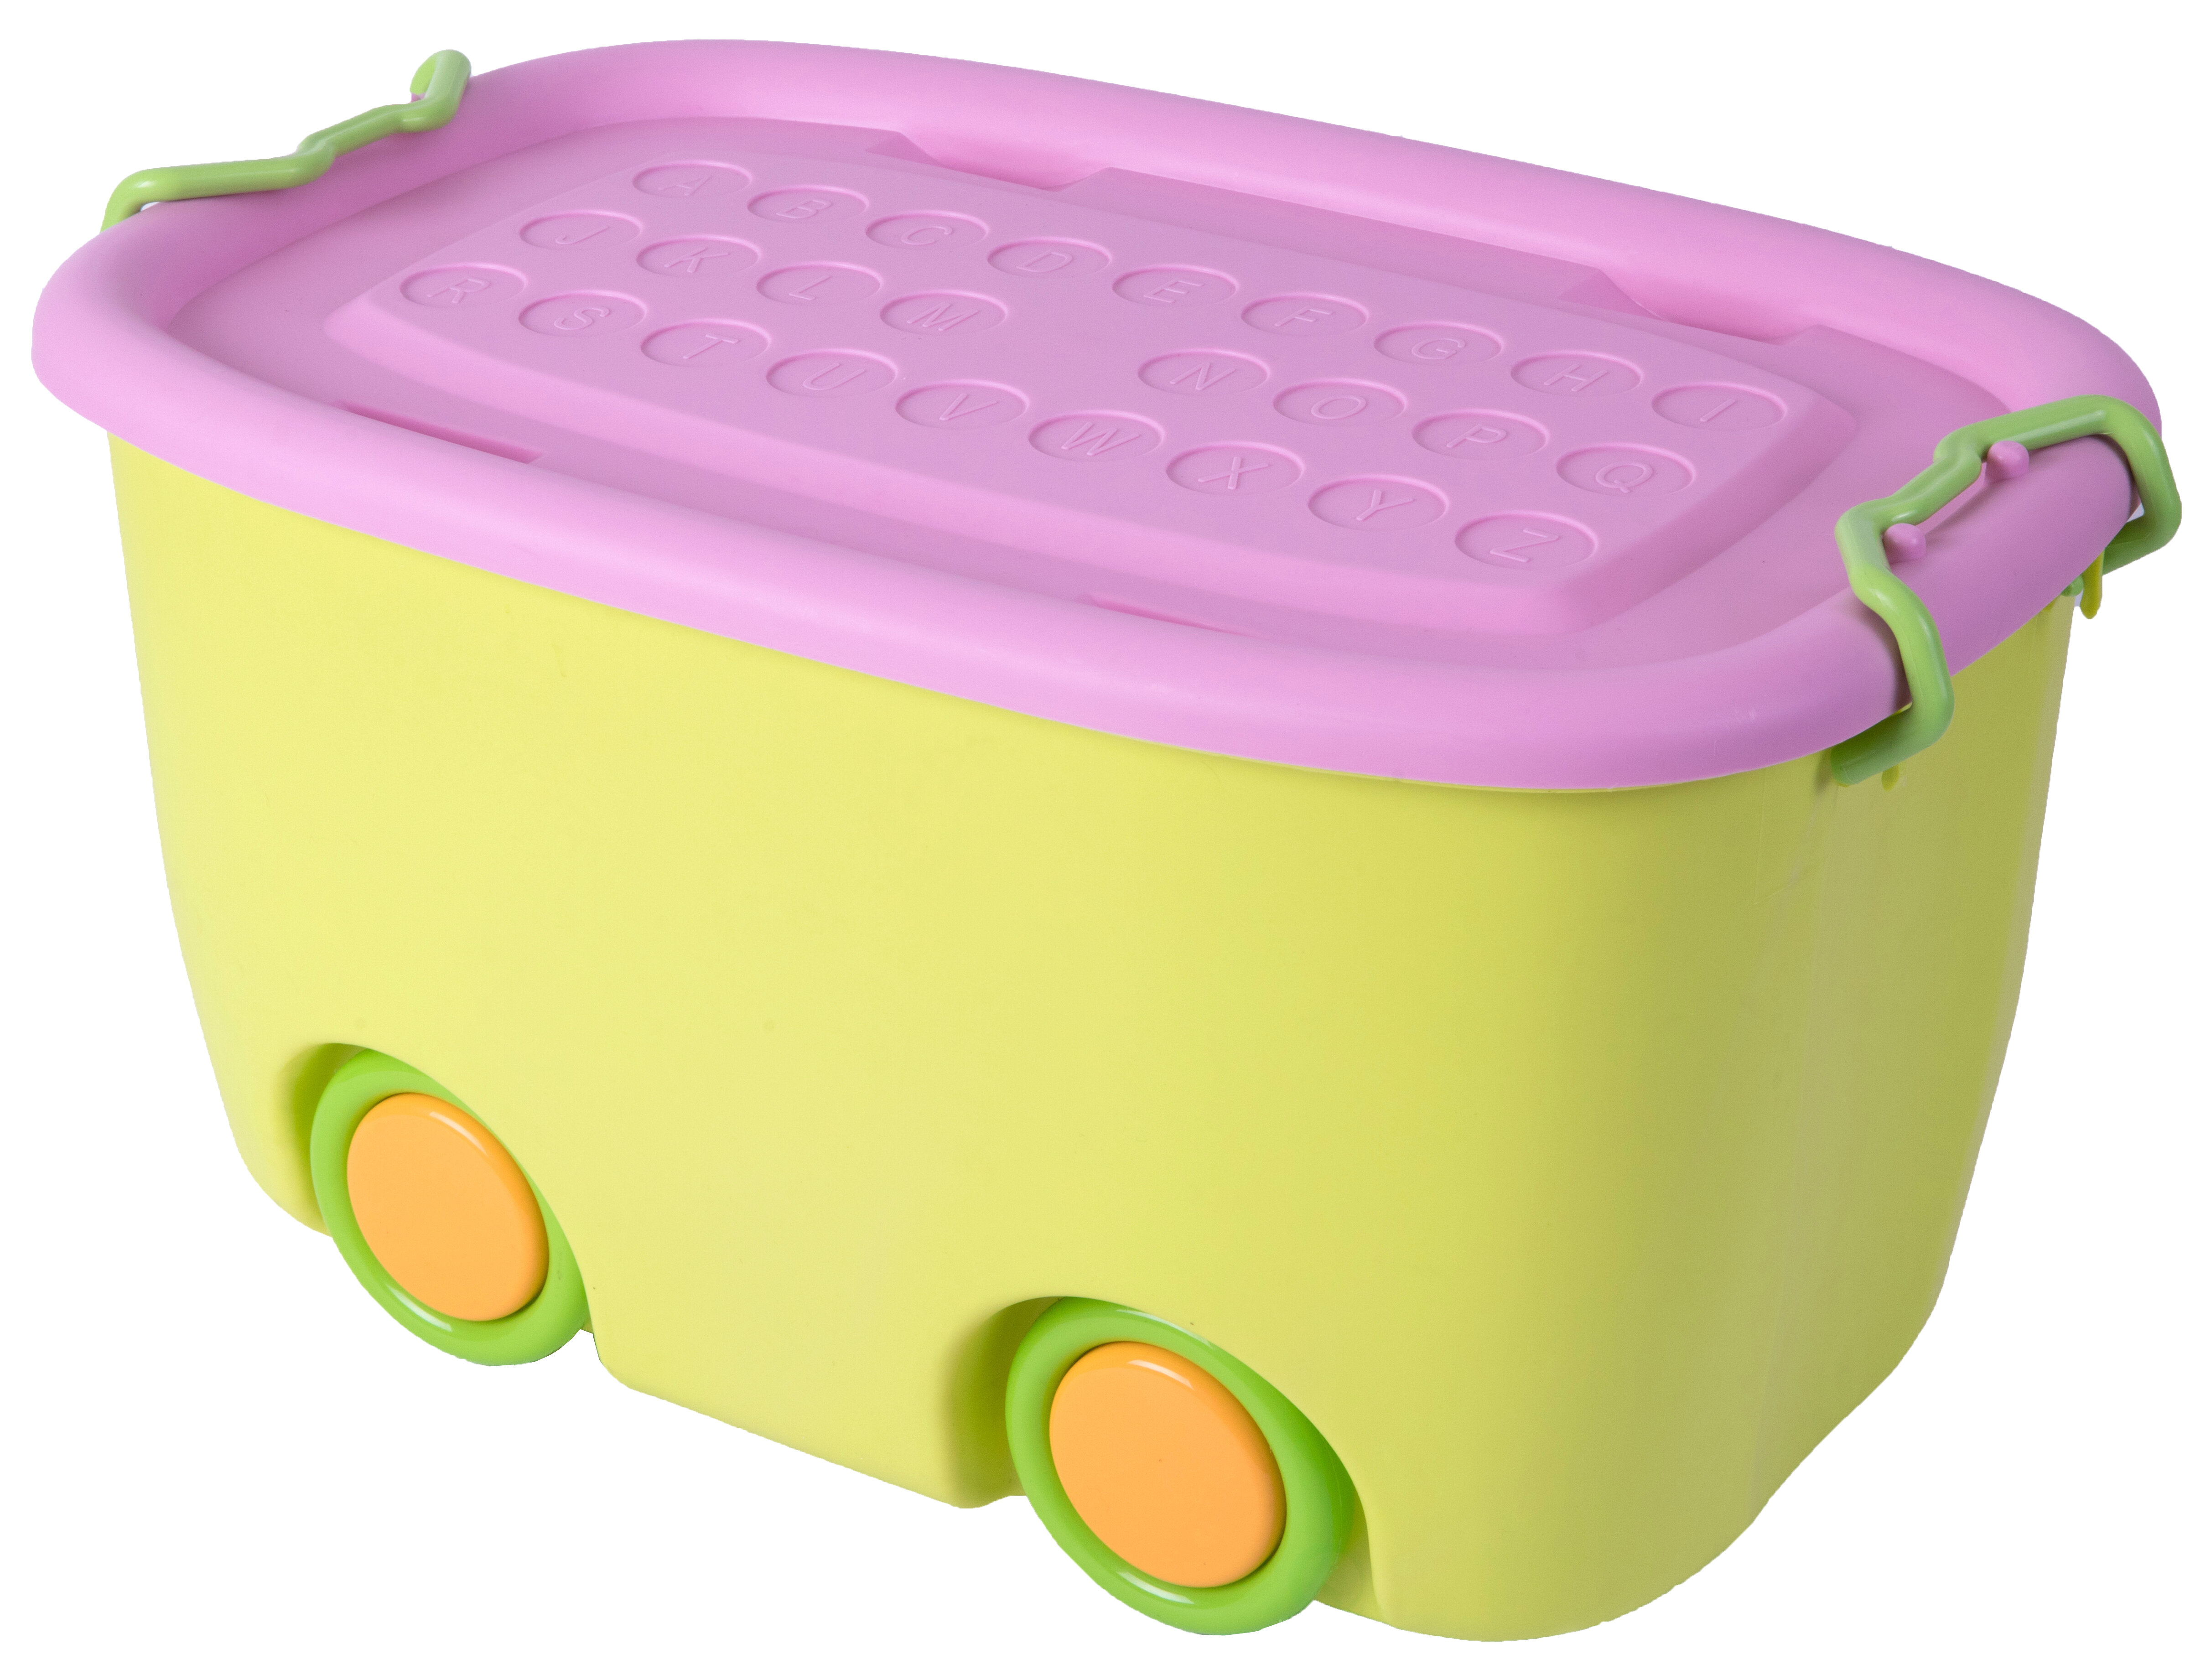 2-in-1 Toy Box and Art Lid Pink Step2 Storage Bedroom Childrens Playroom -  NEW